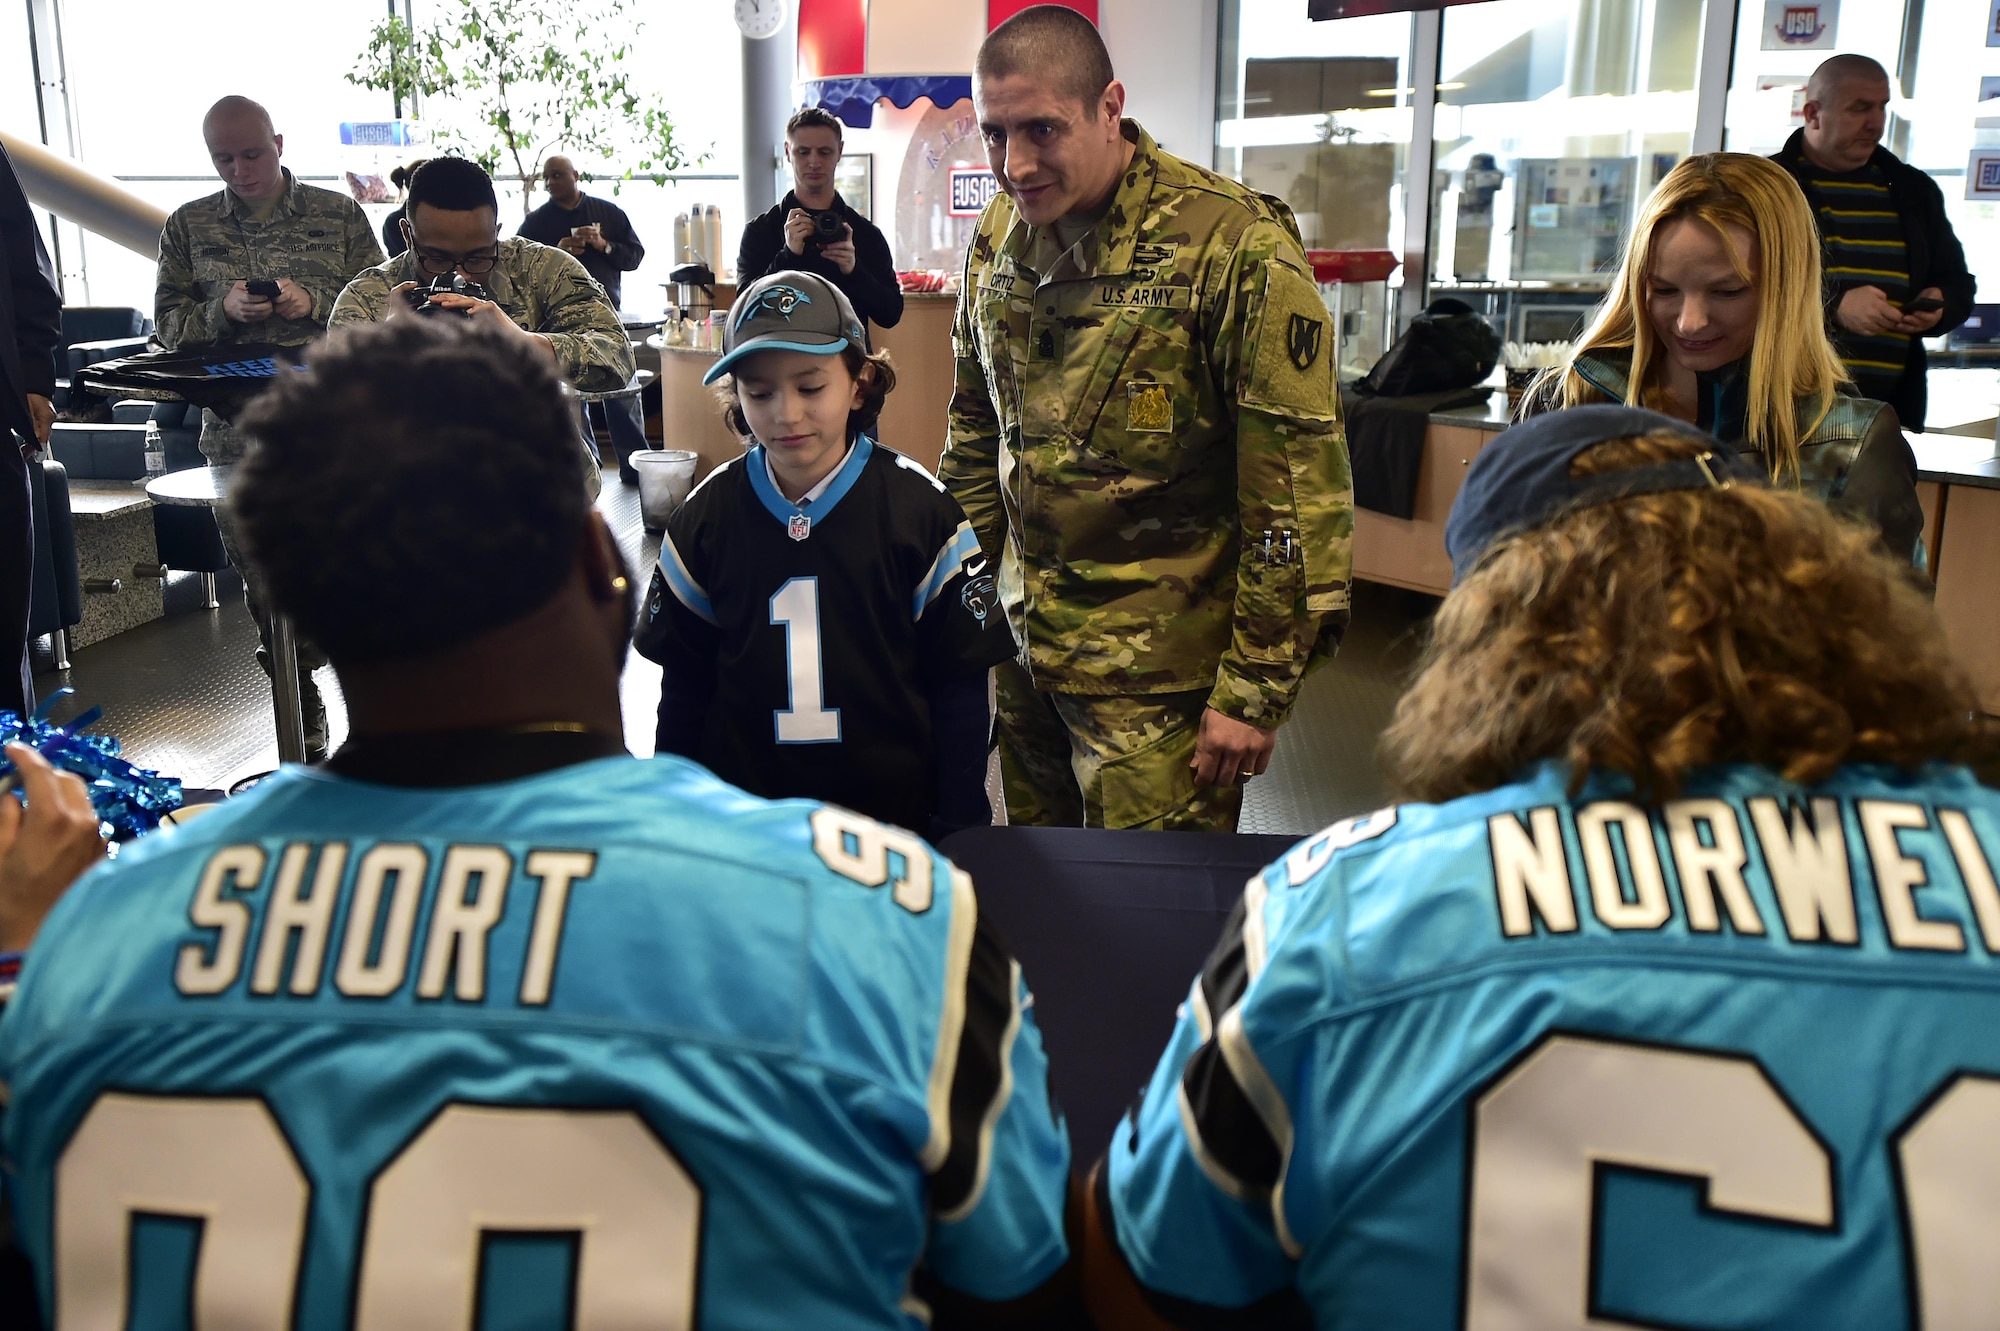 Carolina Panthers sign autographs for fans during a meet and greet at the 721st Aerial Port Squadron’s Passenger Terminal on Ramstein Air Base, Germany, March 6, 2017. Panther’s players flew to Germany as part of the United Service Organization’s efforts to improve the lives of service members across the world. (U.S. Air Force photo by Senior Airman Jonathan Bass)